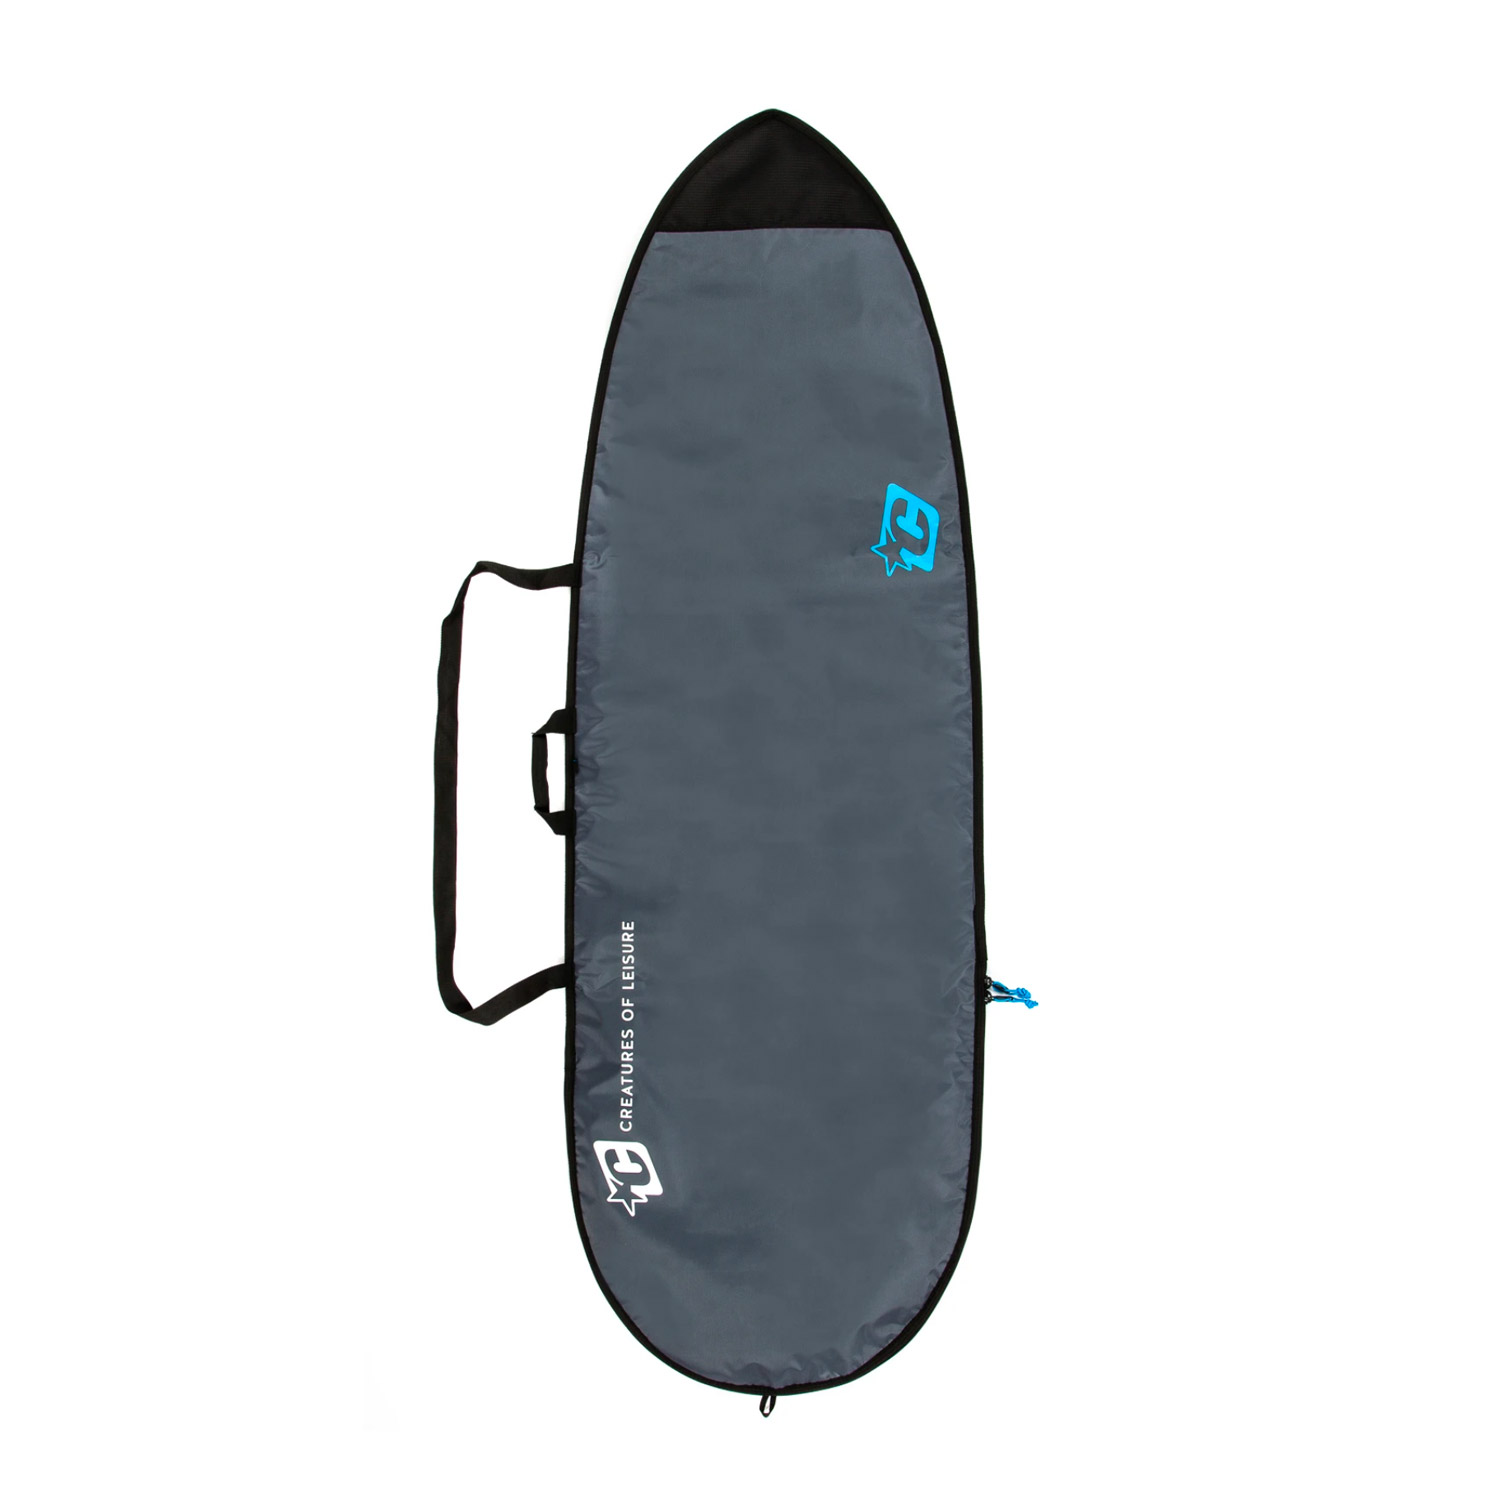 Creatures Lite Fish Cover Surfboard bag – 5'10-7'6